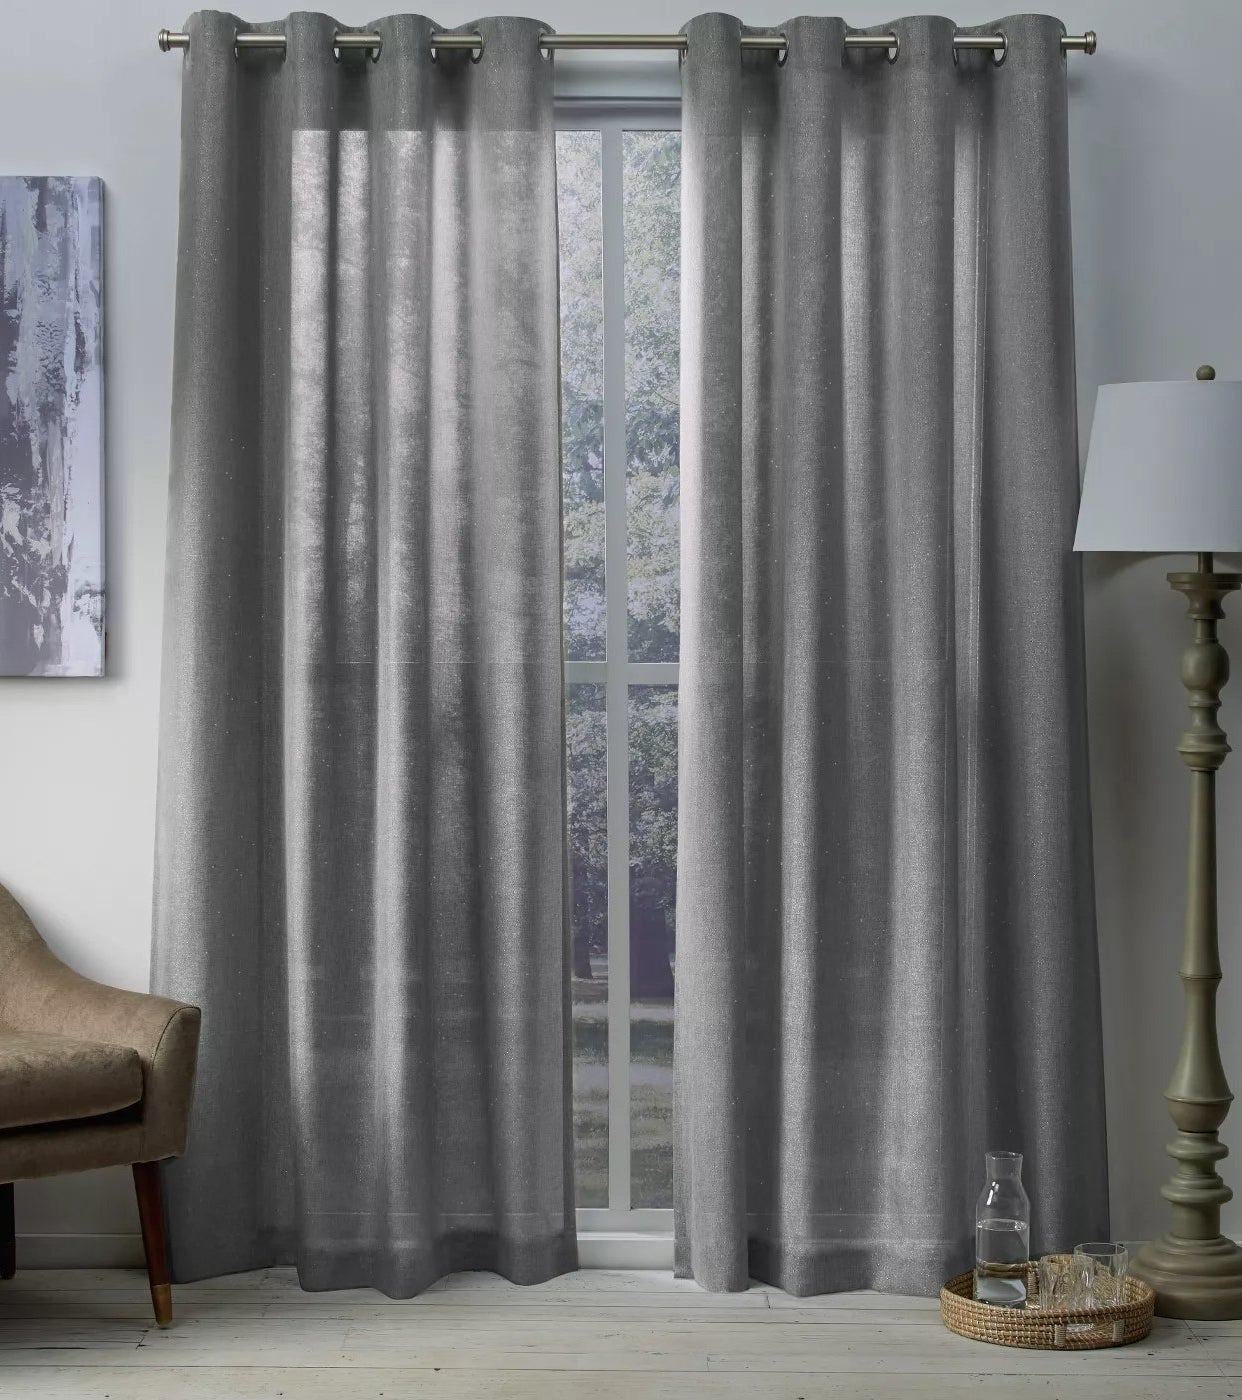 The gray curtain panels